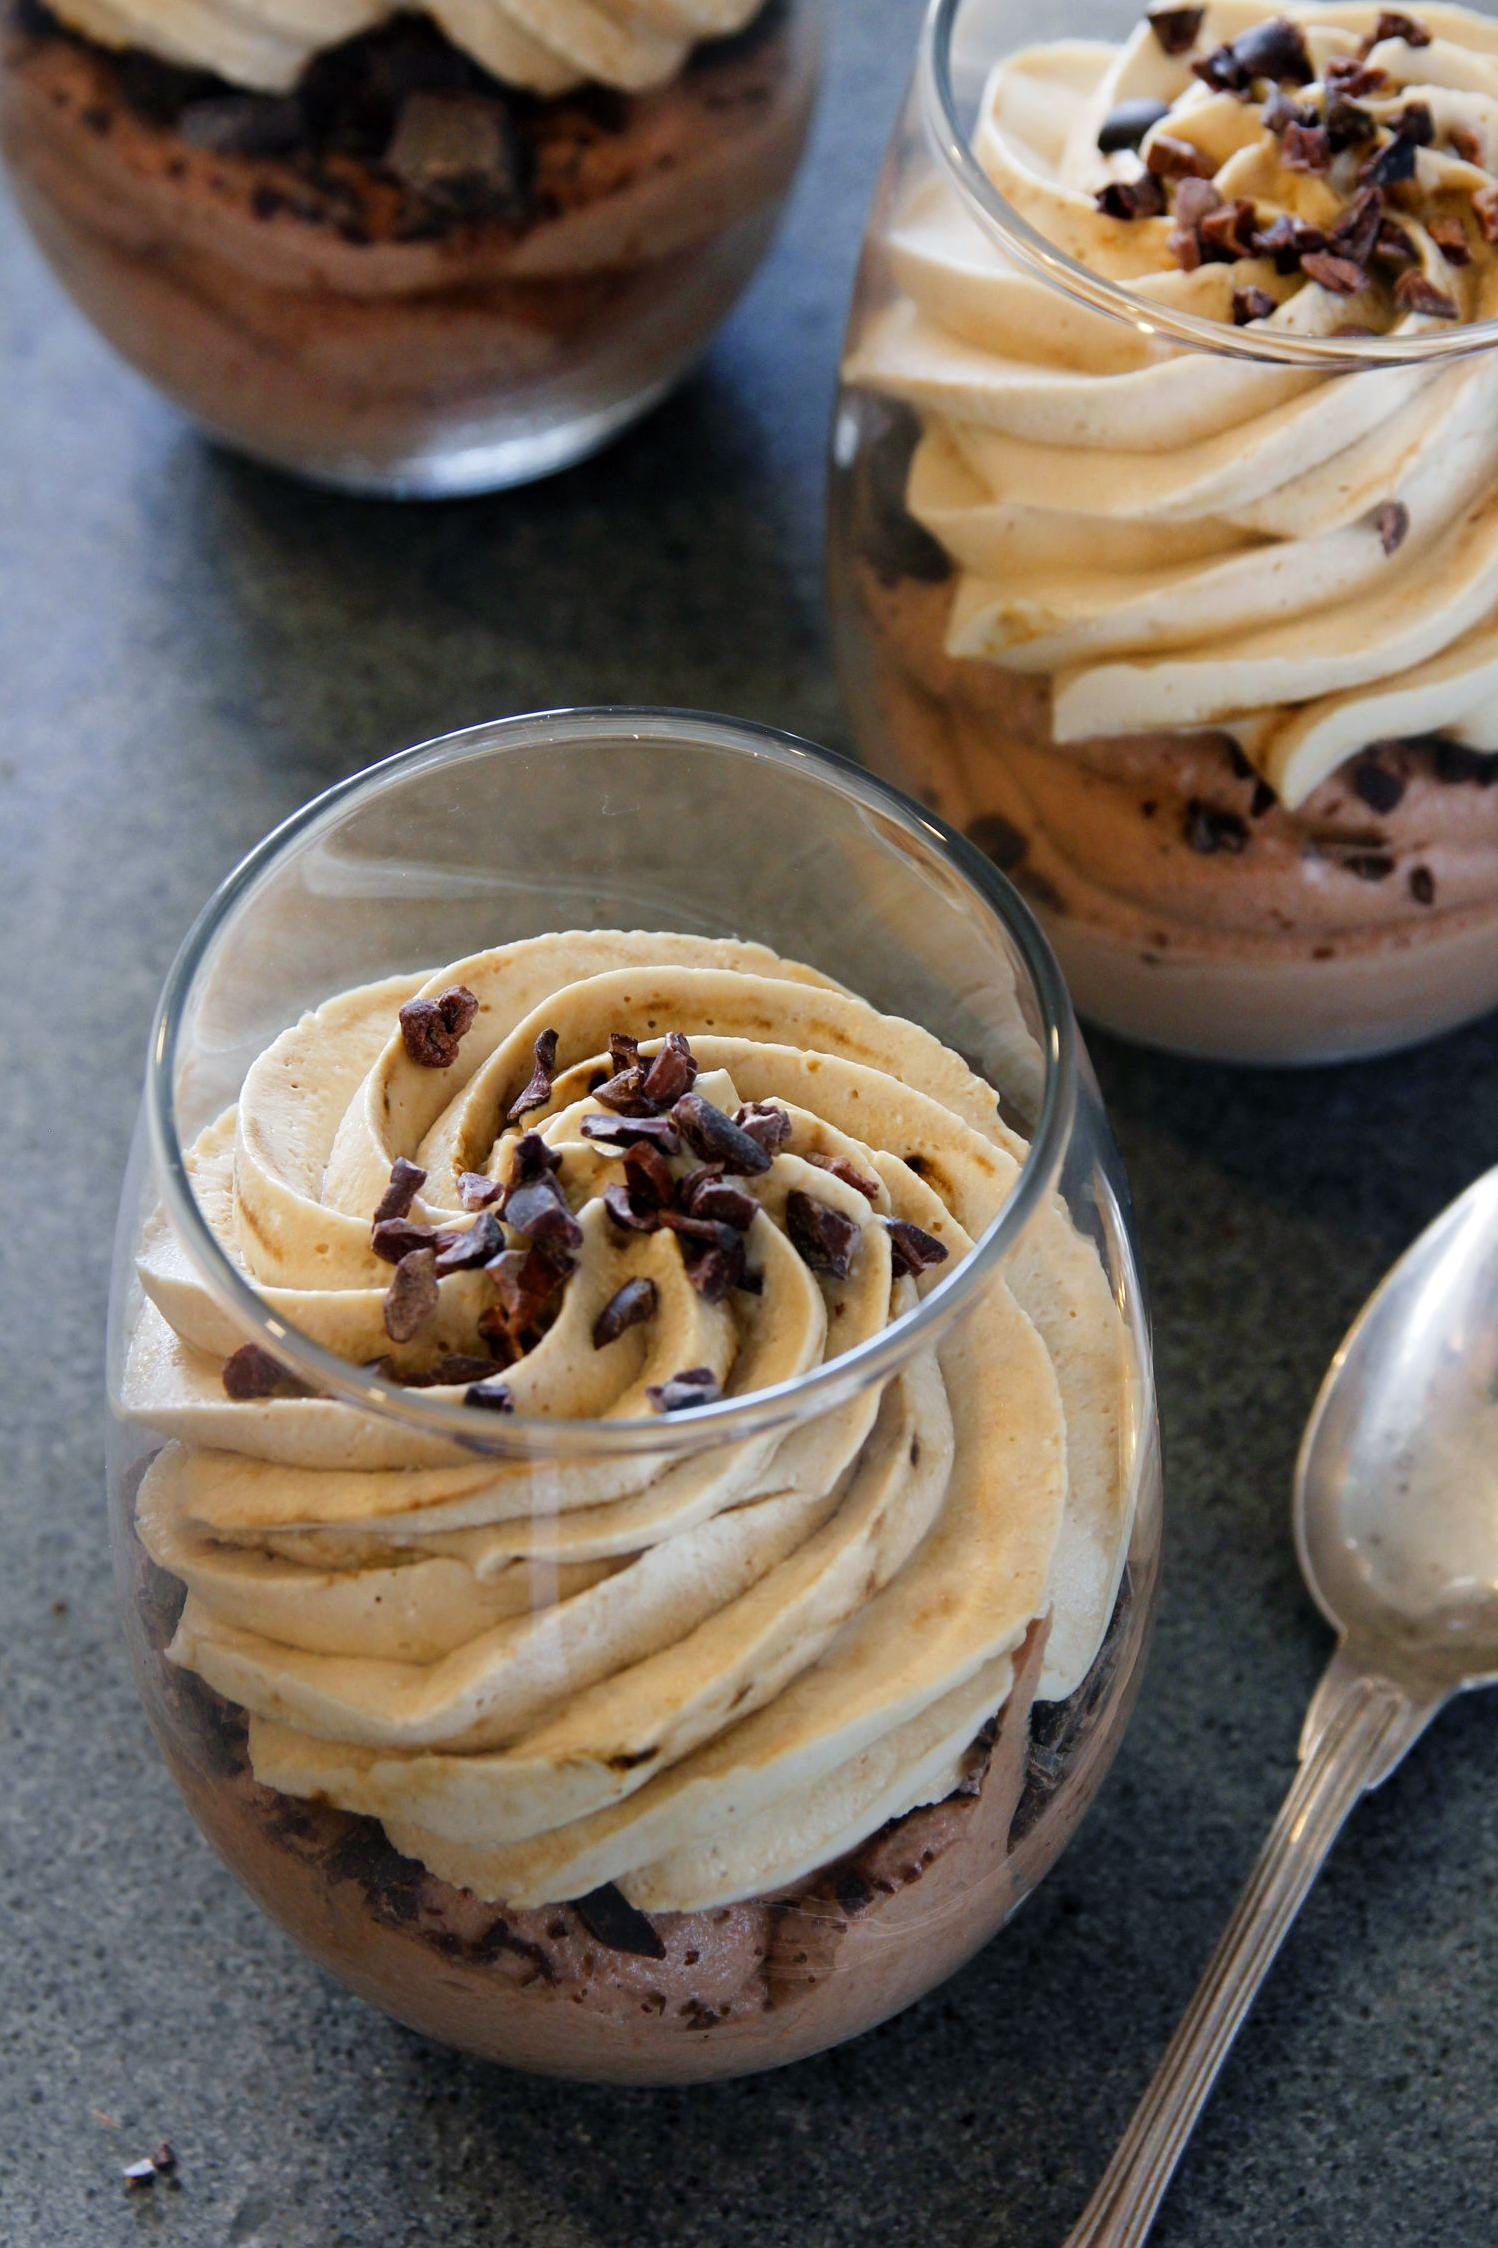  Satisfy your sweet tooth with this chocolate and coffee delight.